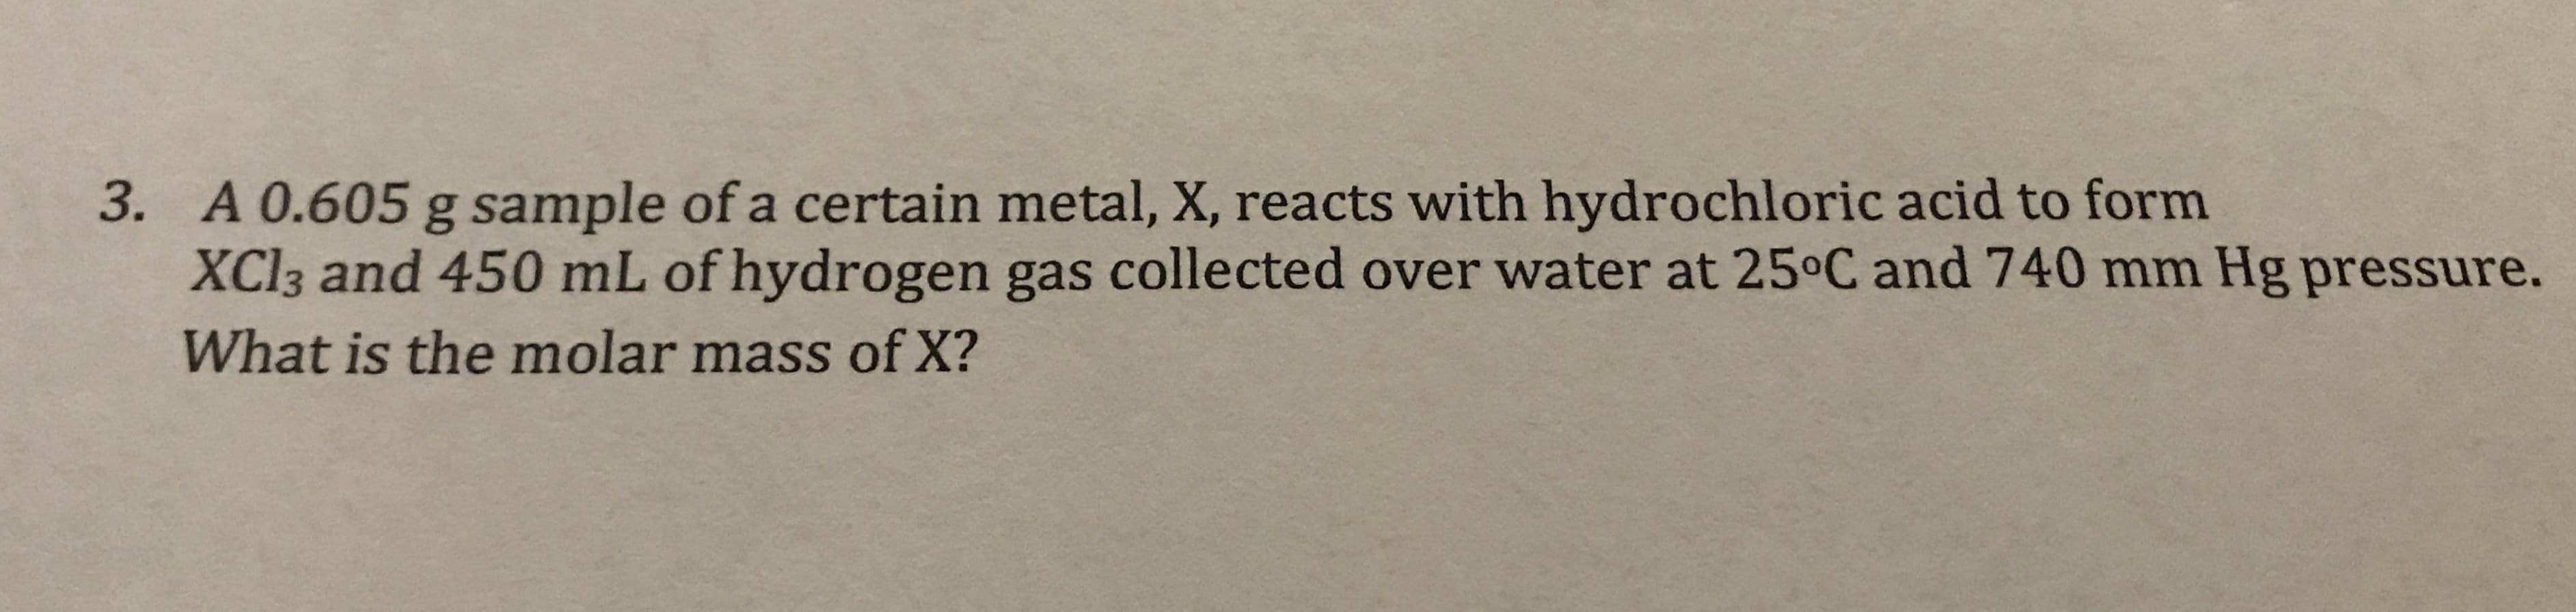 3. A 0.605 g sample of a certain metal, X, reacts with hydrochloric acid to form
XCI3 and 450 mL of hydrogen gas collected over water at 25°C and 740 mm Hg pressure.
What is the molar mass of X?
